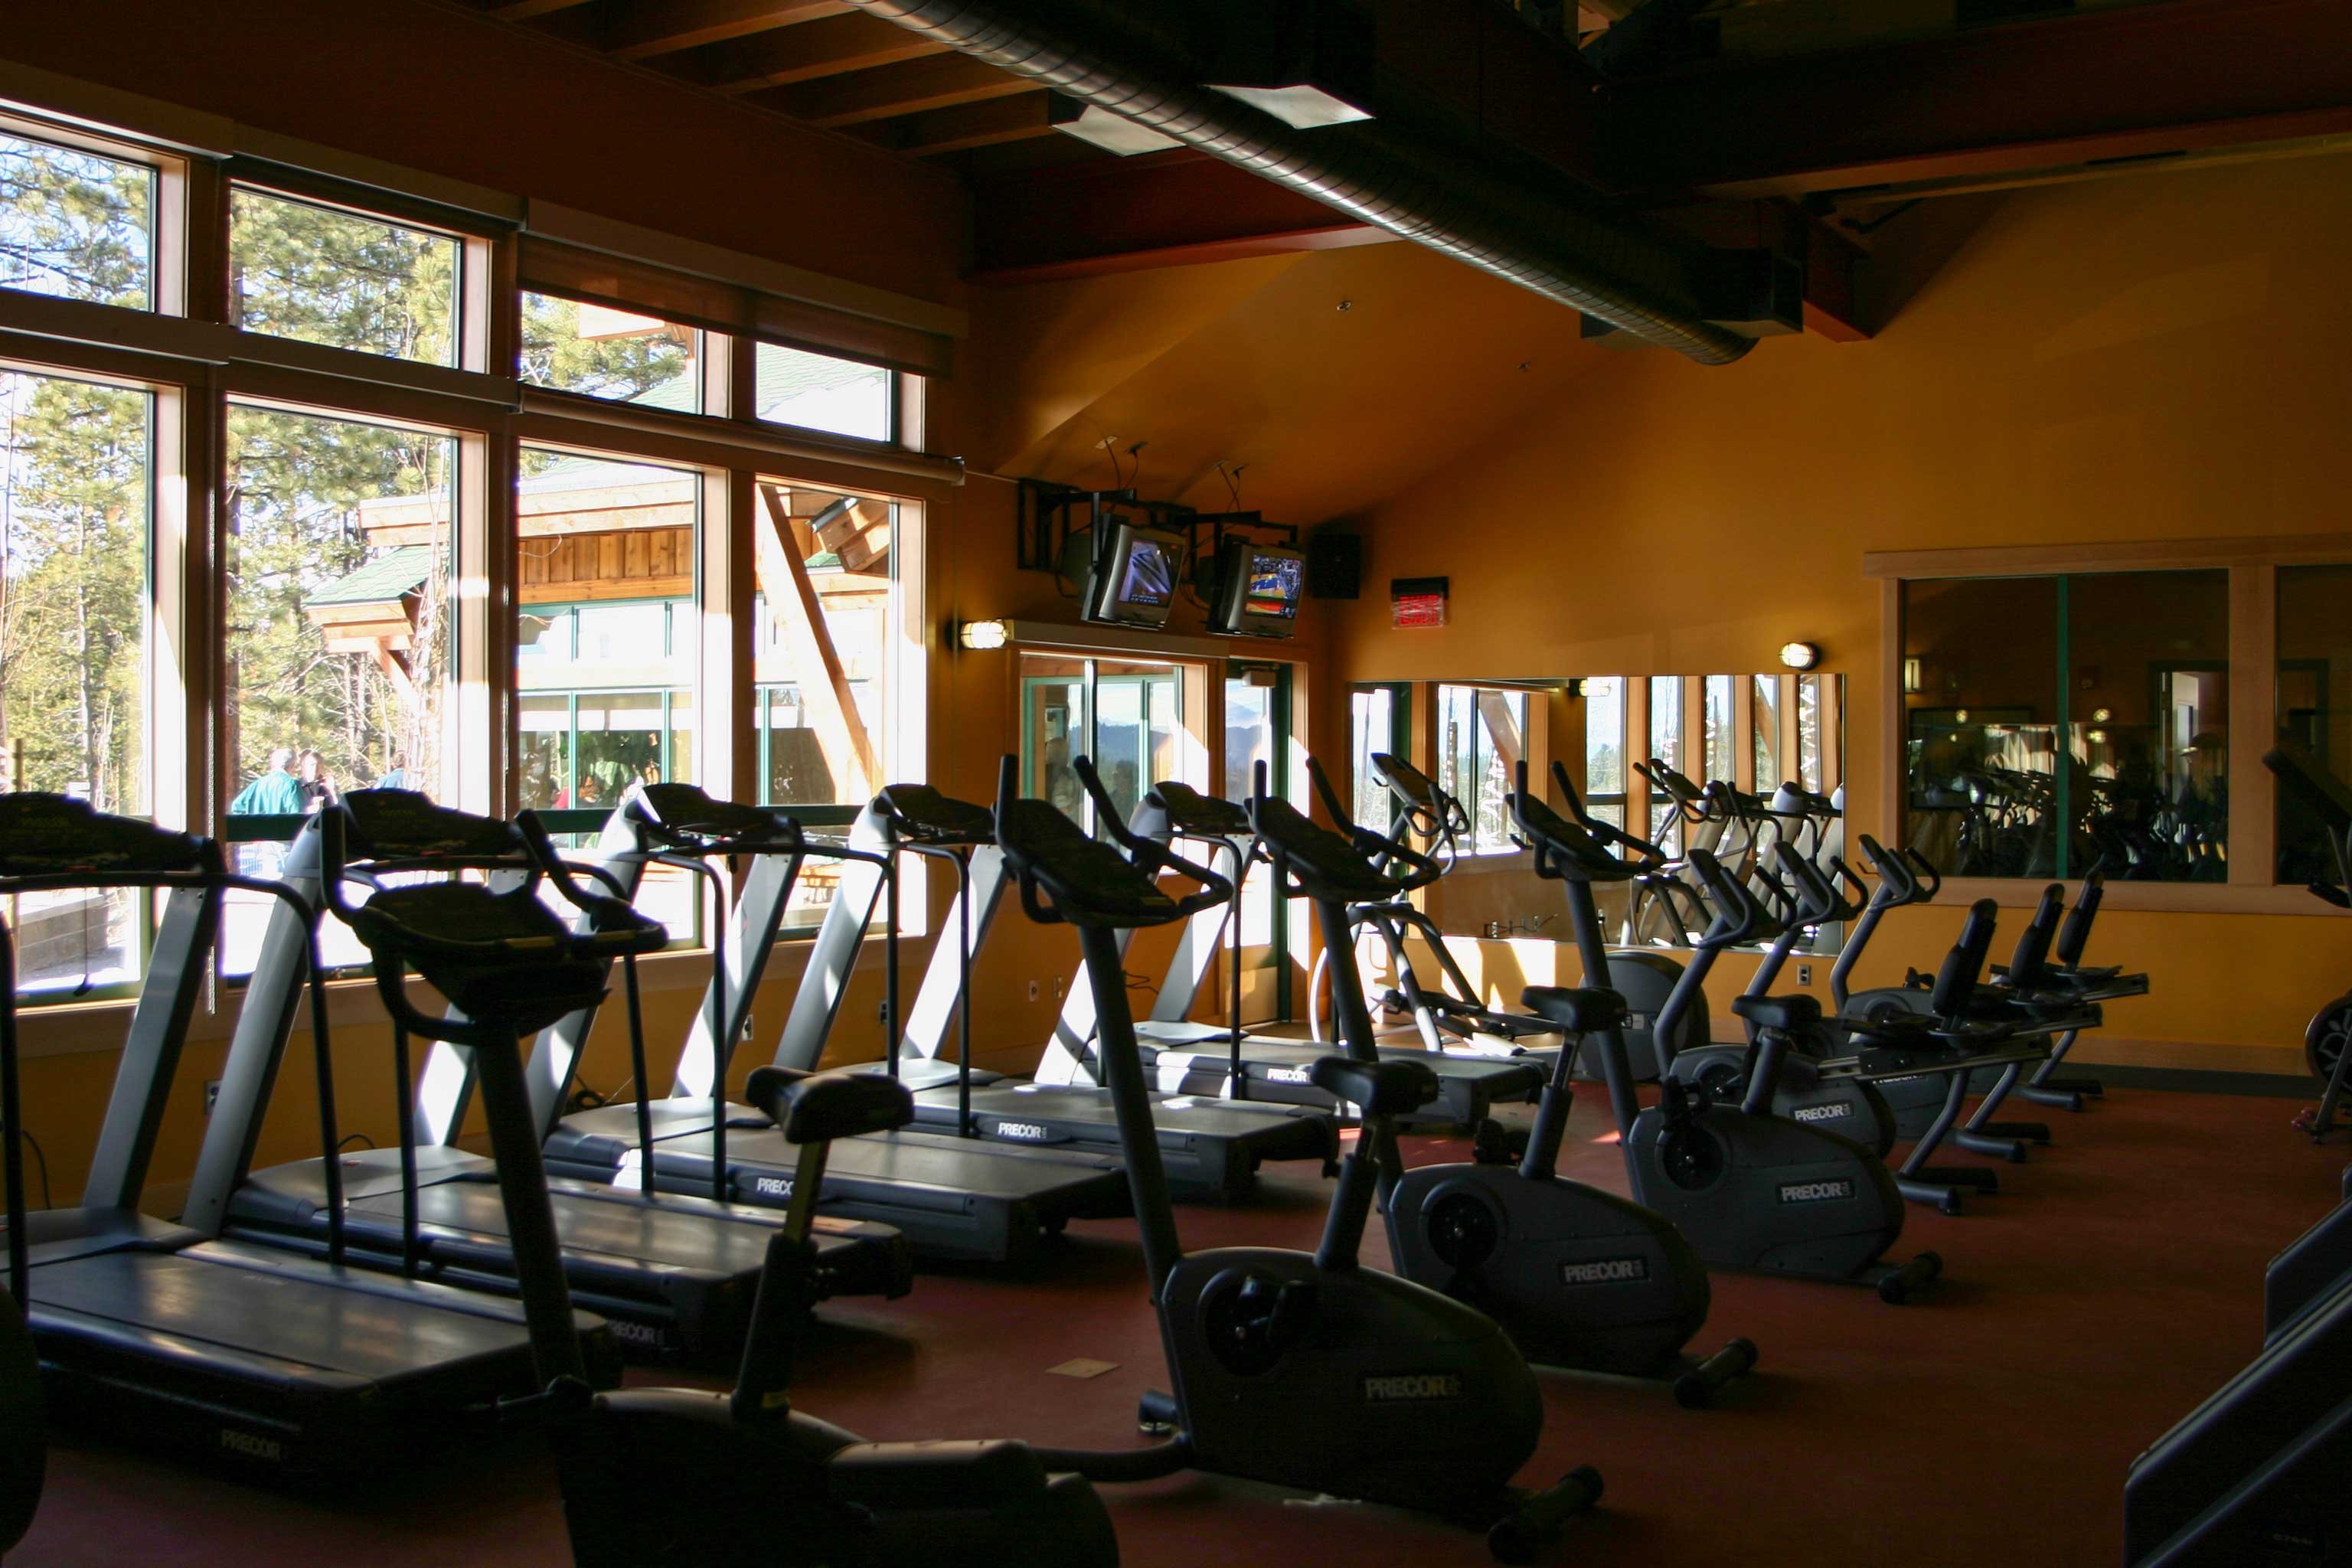 Keep up with your fitness routine in the fully equipped gym!